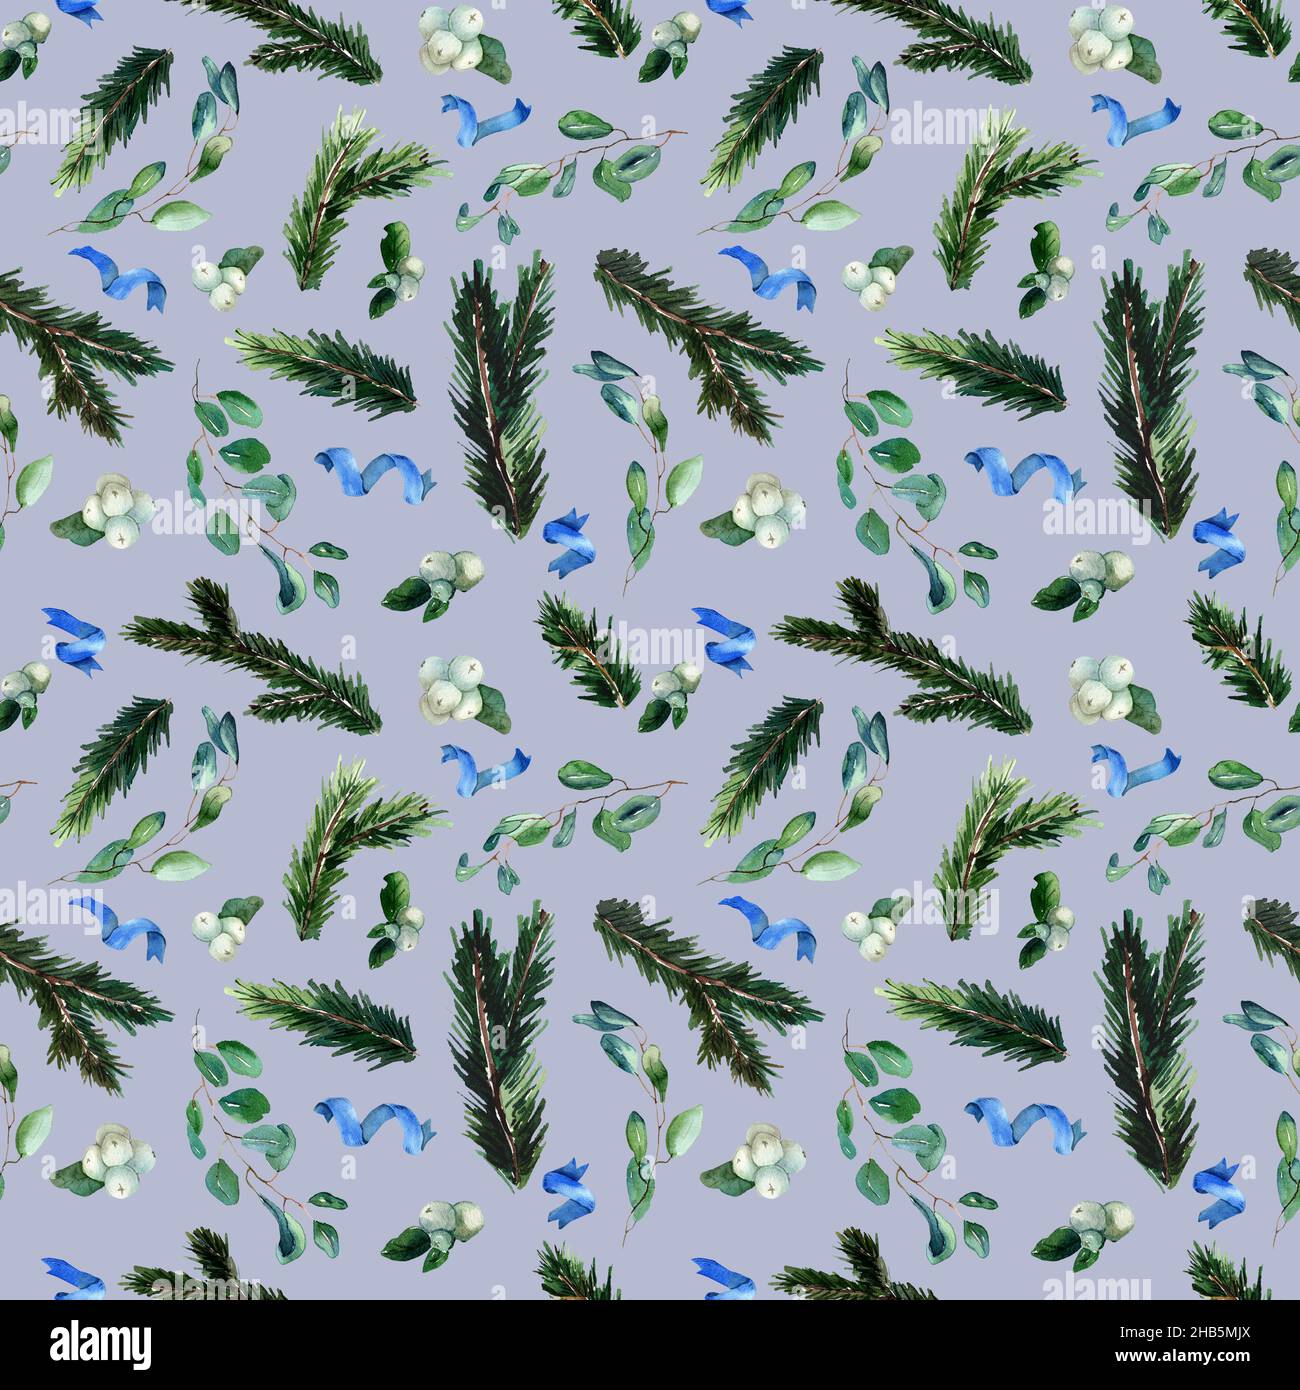 Winter seamless pattern with Fir branch, baby blue eucalyptus and Snowberry on gray background. Watercolor Christmas tile. Season design for textile, Stock Photo